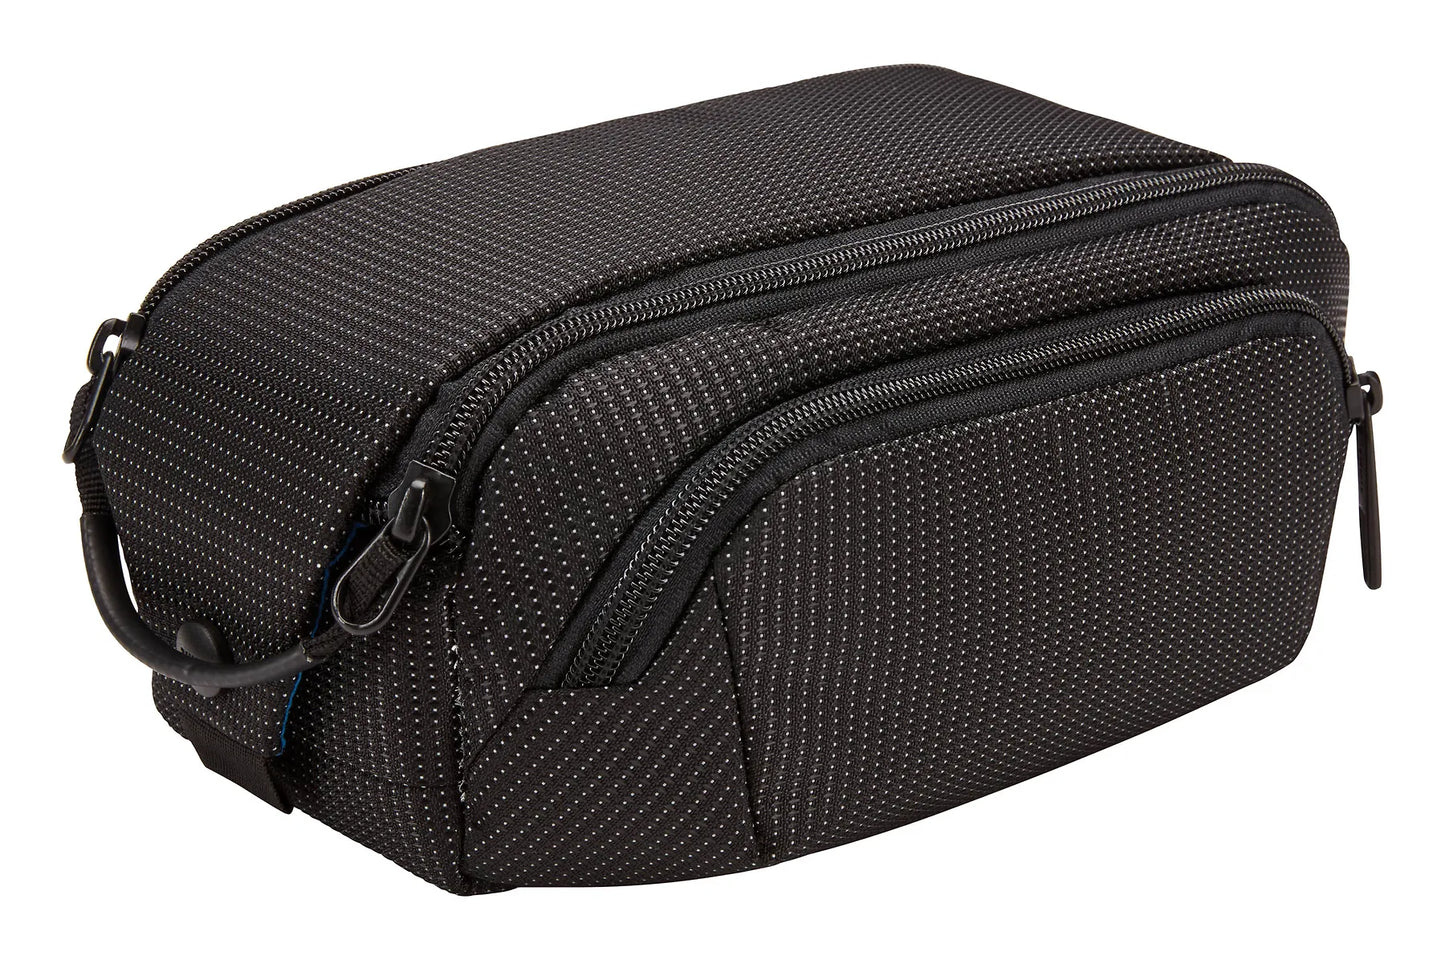 THULE Crossover 2 Toiletry Bag